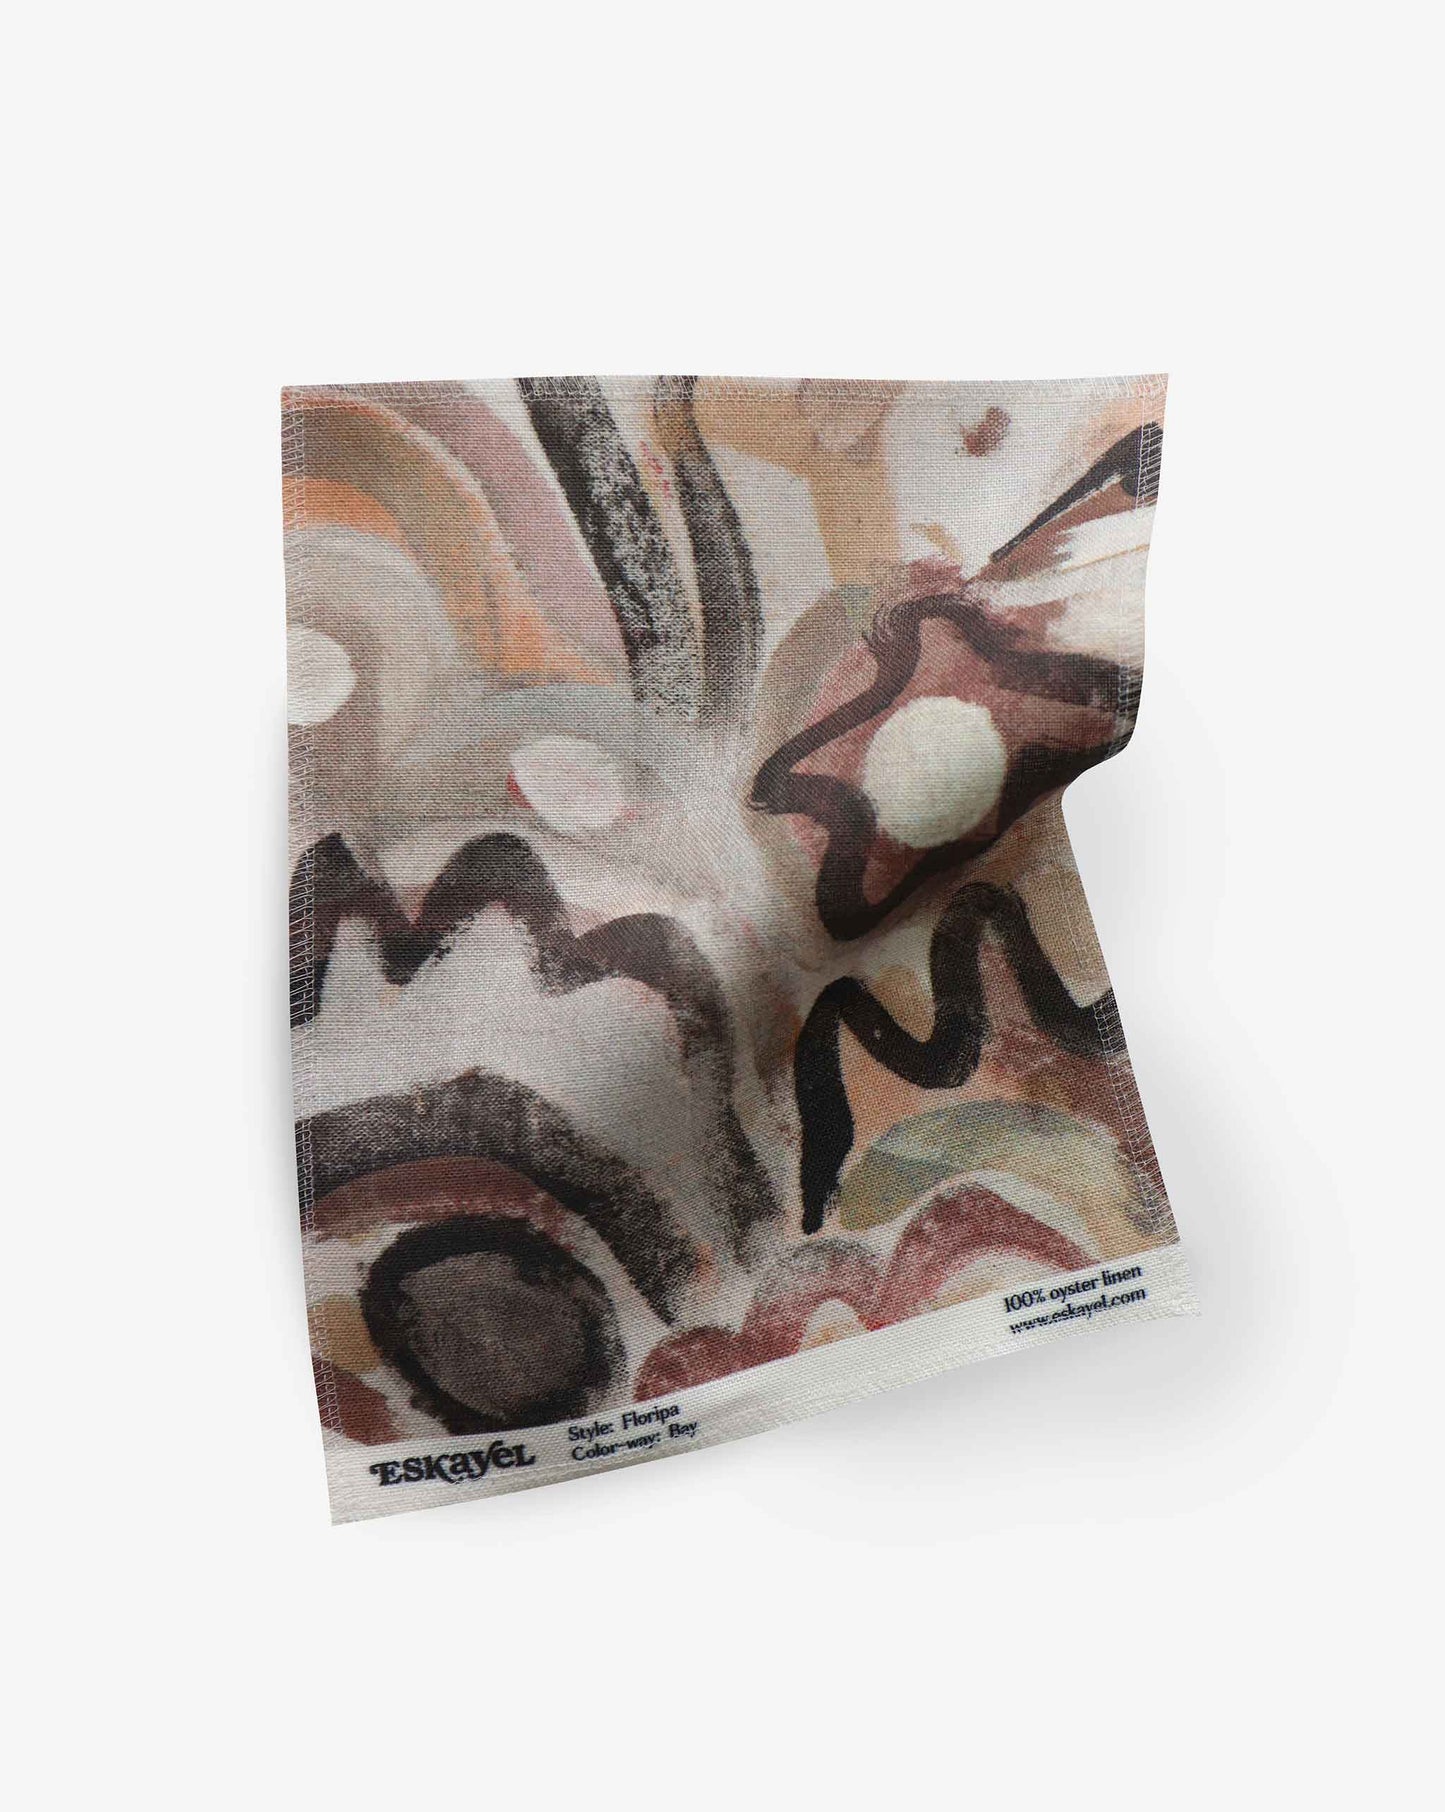 A fabric swatch with our Floripa pattern in Bay featuring a design inspired by the beautiful tropical island of Florianopolis in Brazil that provides a colorway of brown tones.